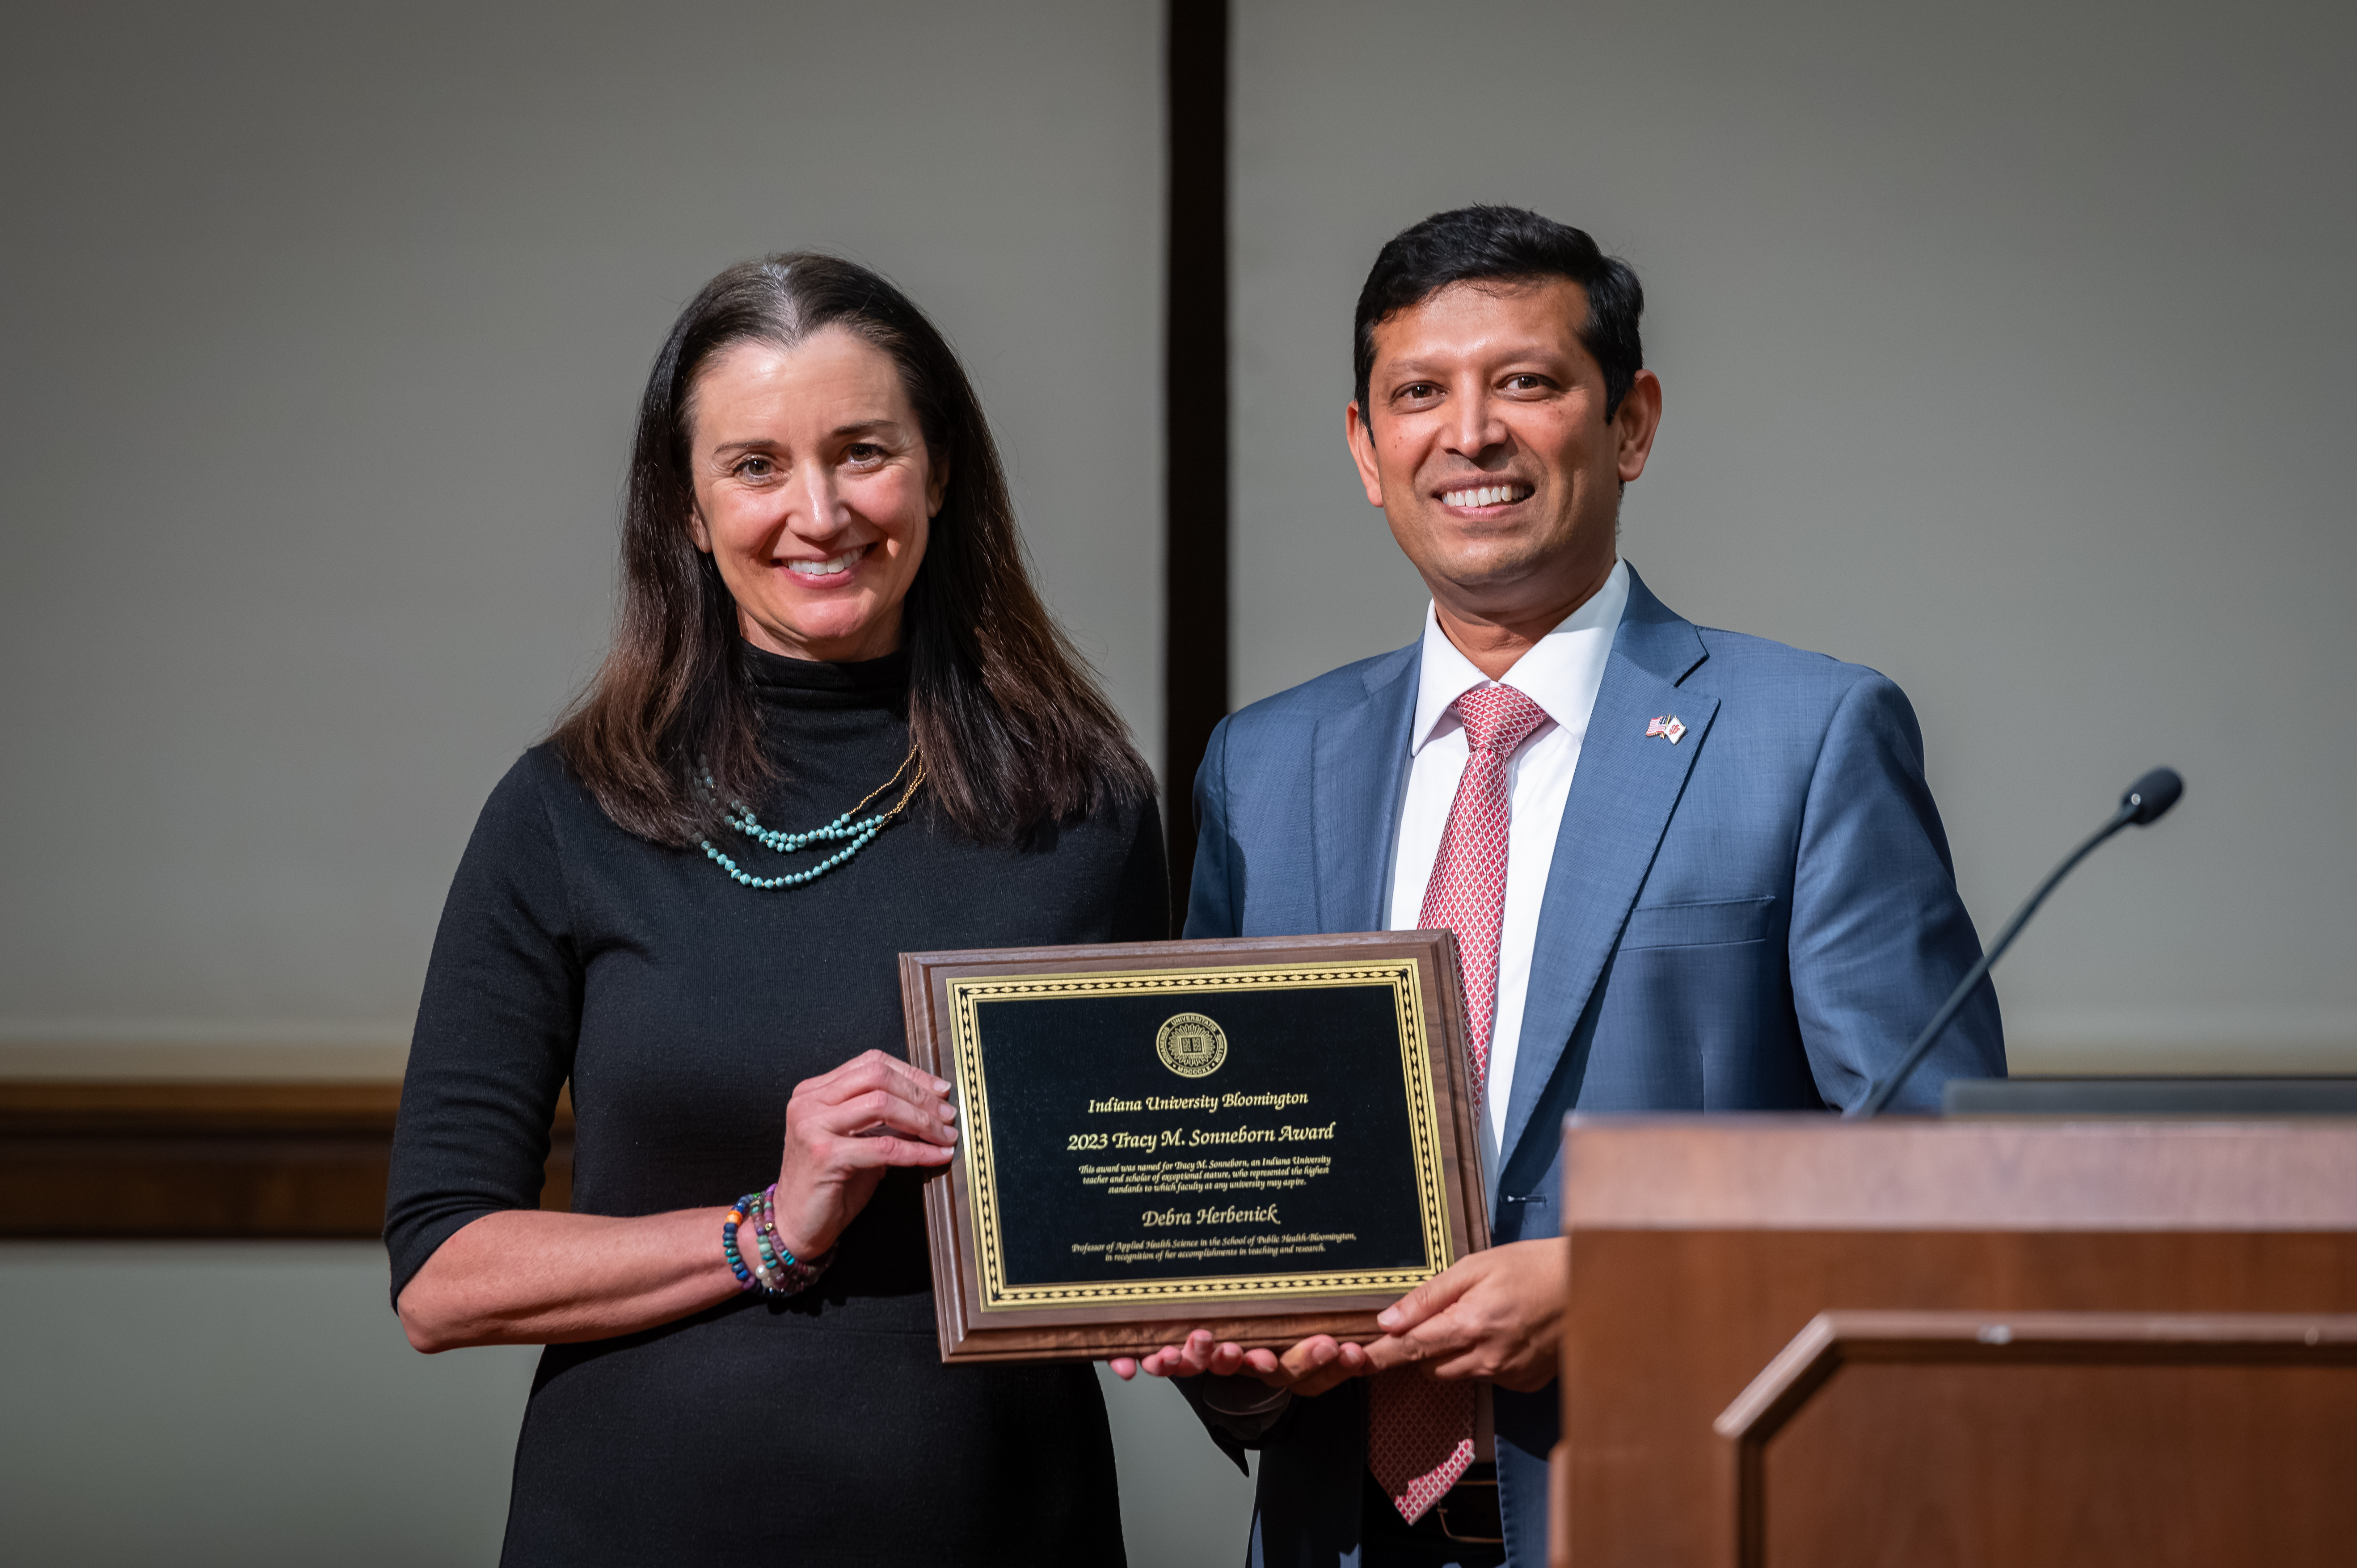 Debra Herbenick, the 2023 Sonneborn Award Winner, stands beside Provost Rahul Shrivastav, as he hands her a plaque with her name and the award title. 